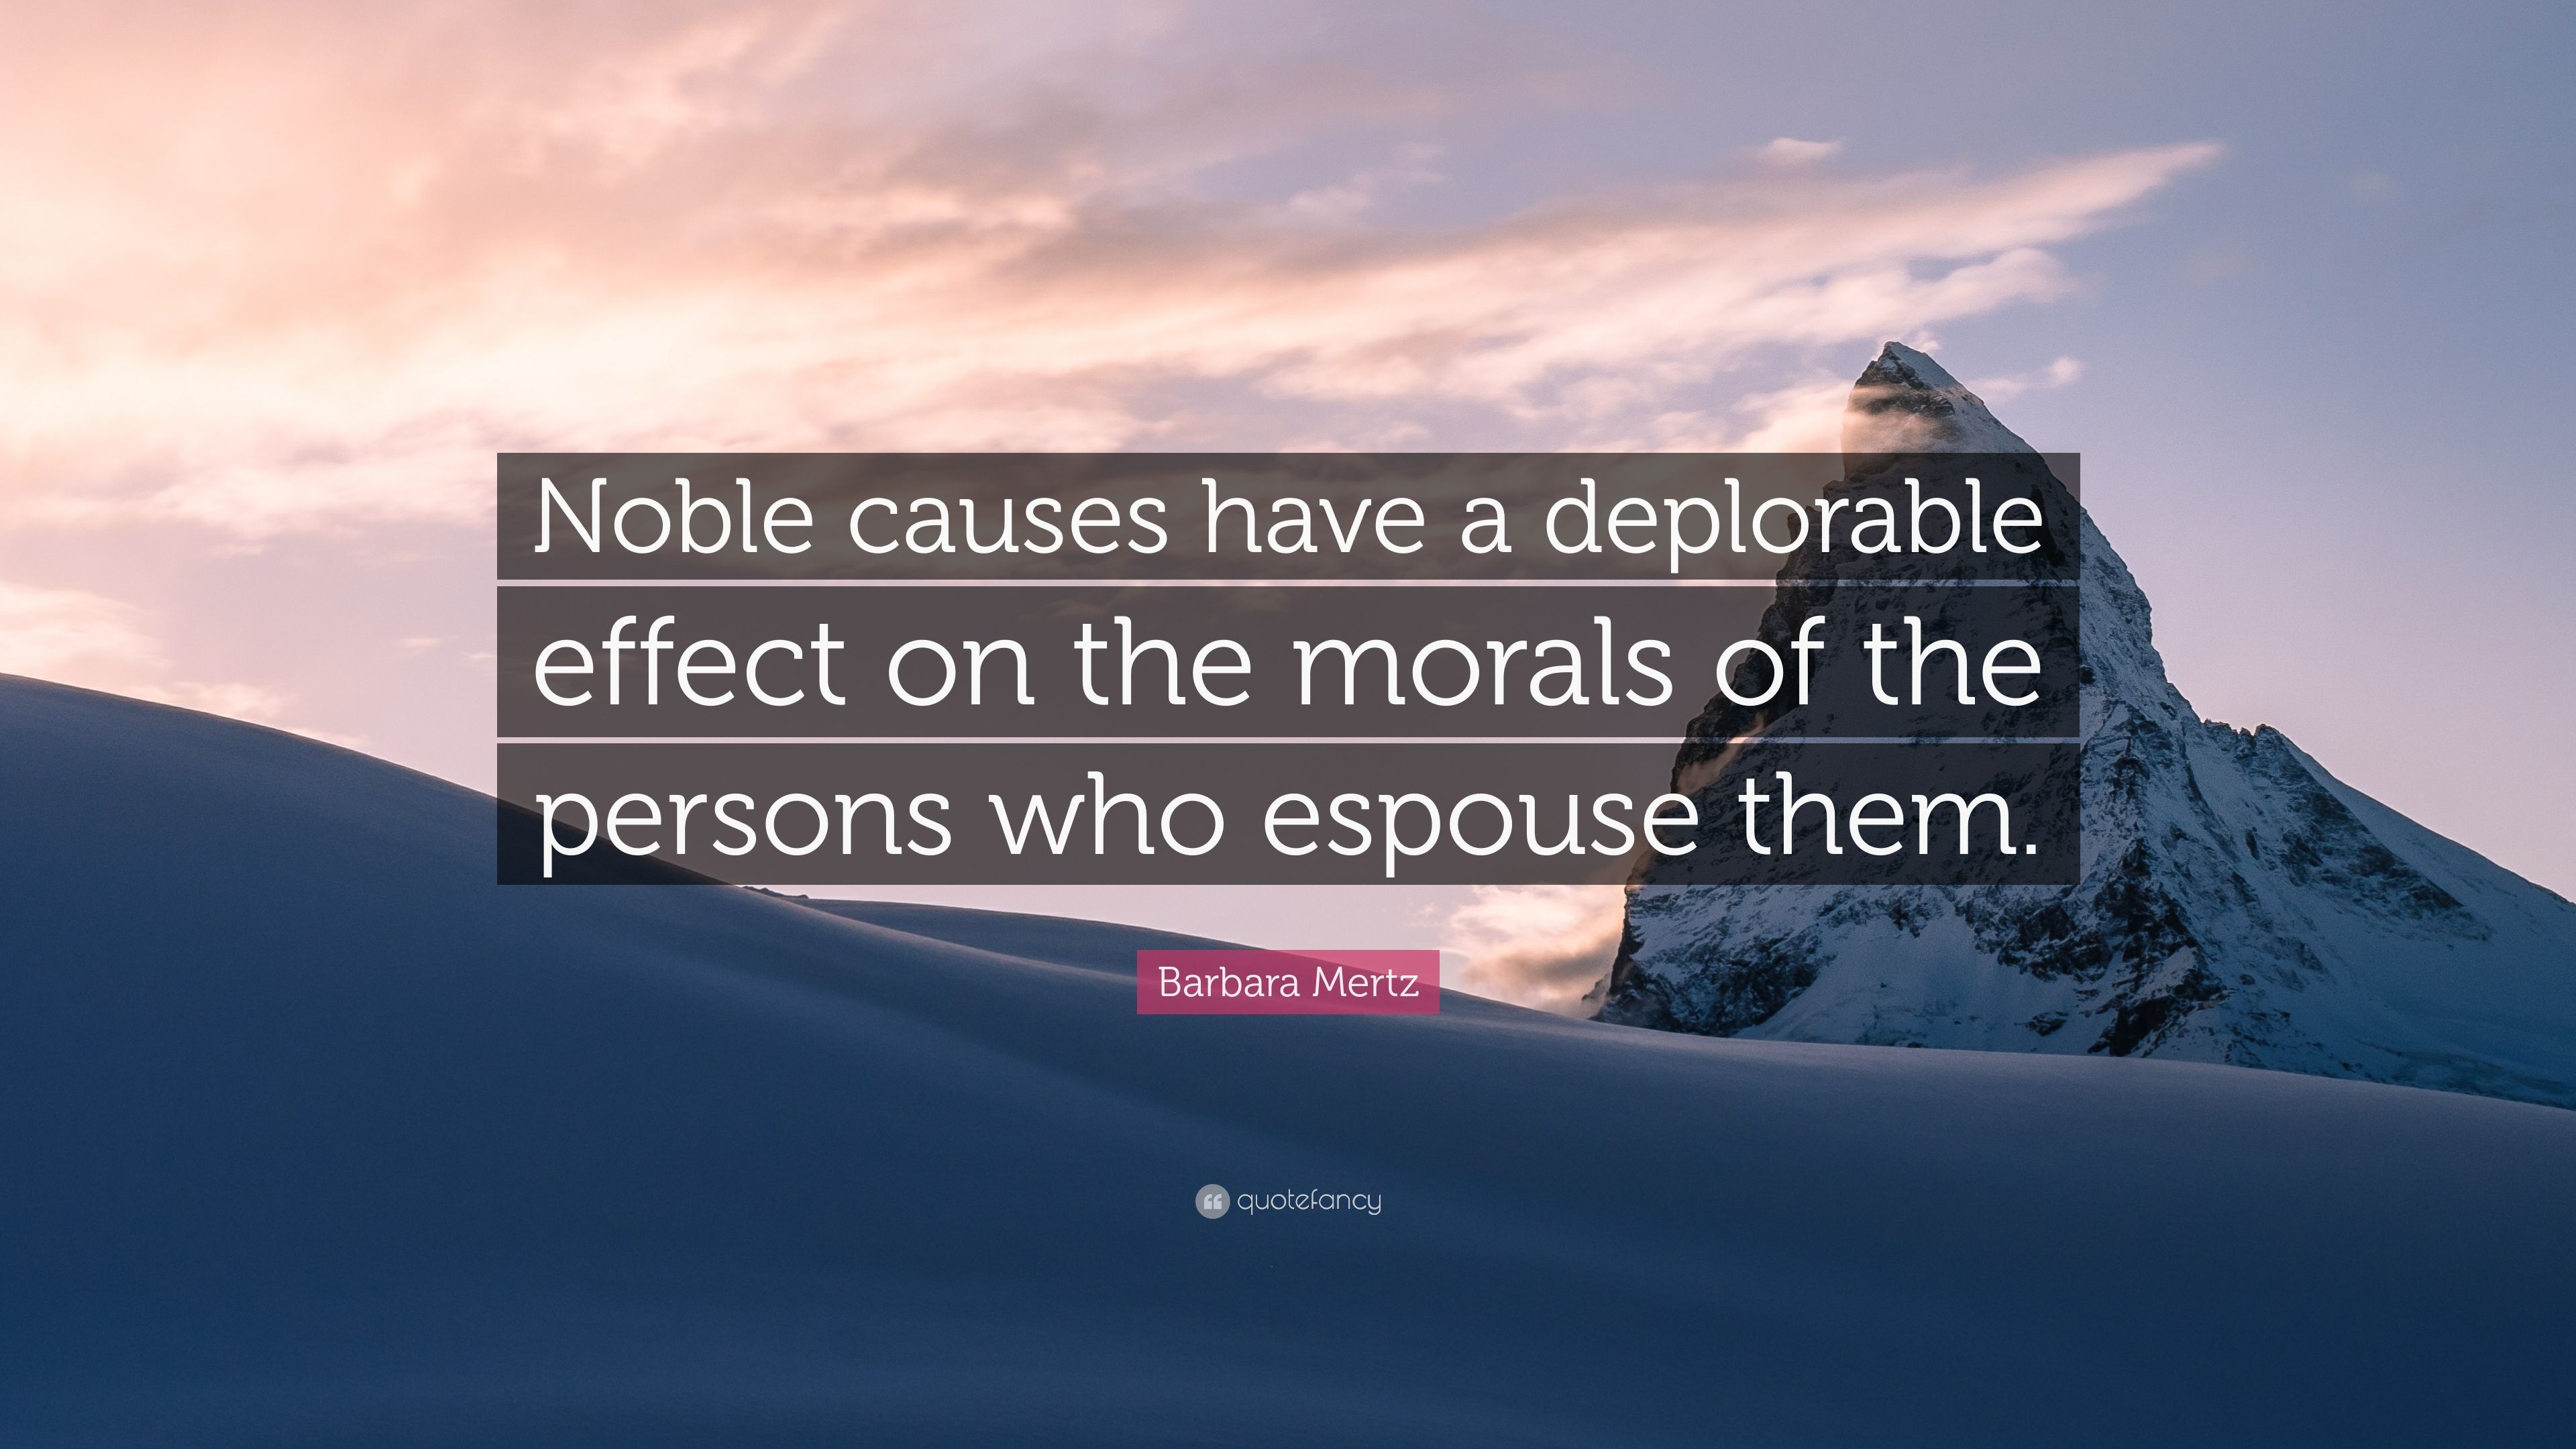 Barbara mertz quote ânoble causes have a deplorable effect on the morals of the persons who